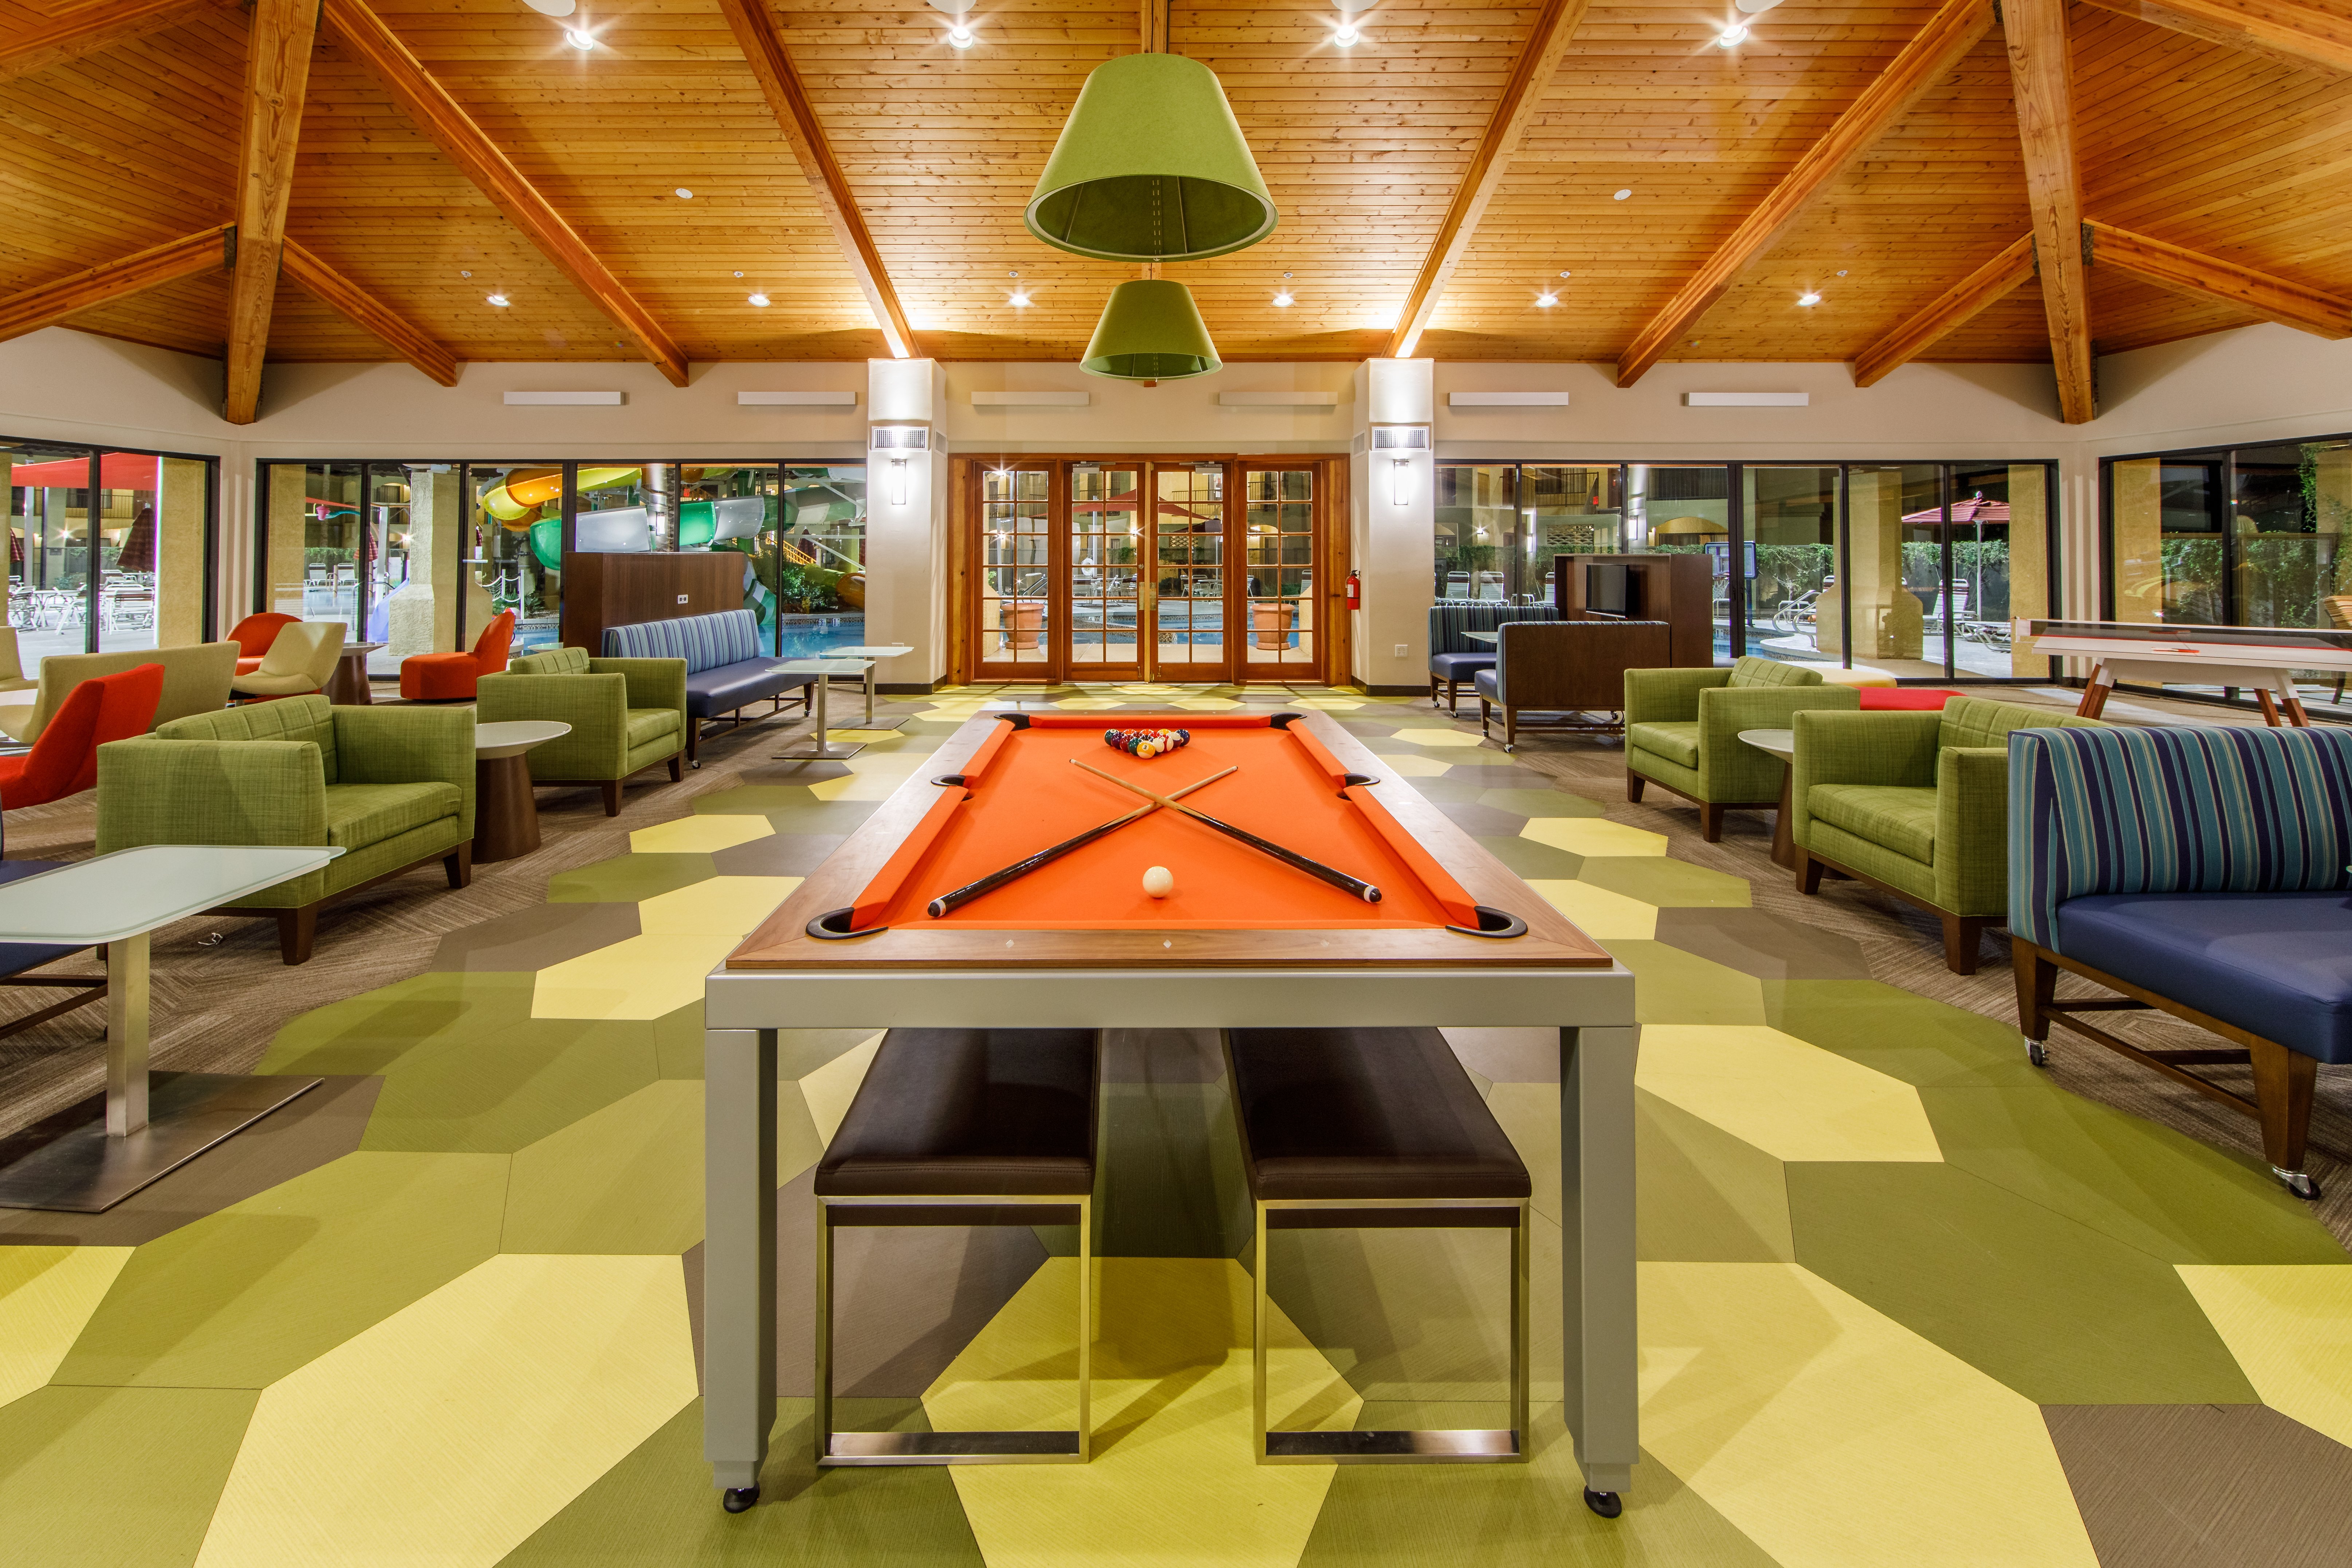 The activity center features a billiards table and lounging space